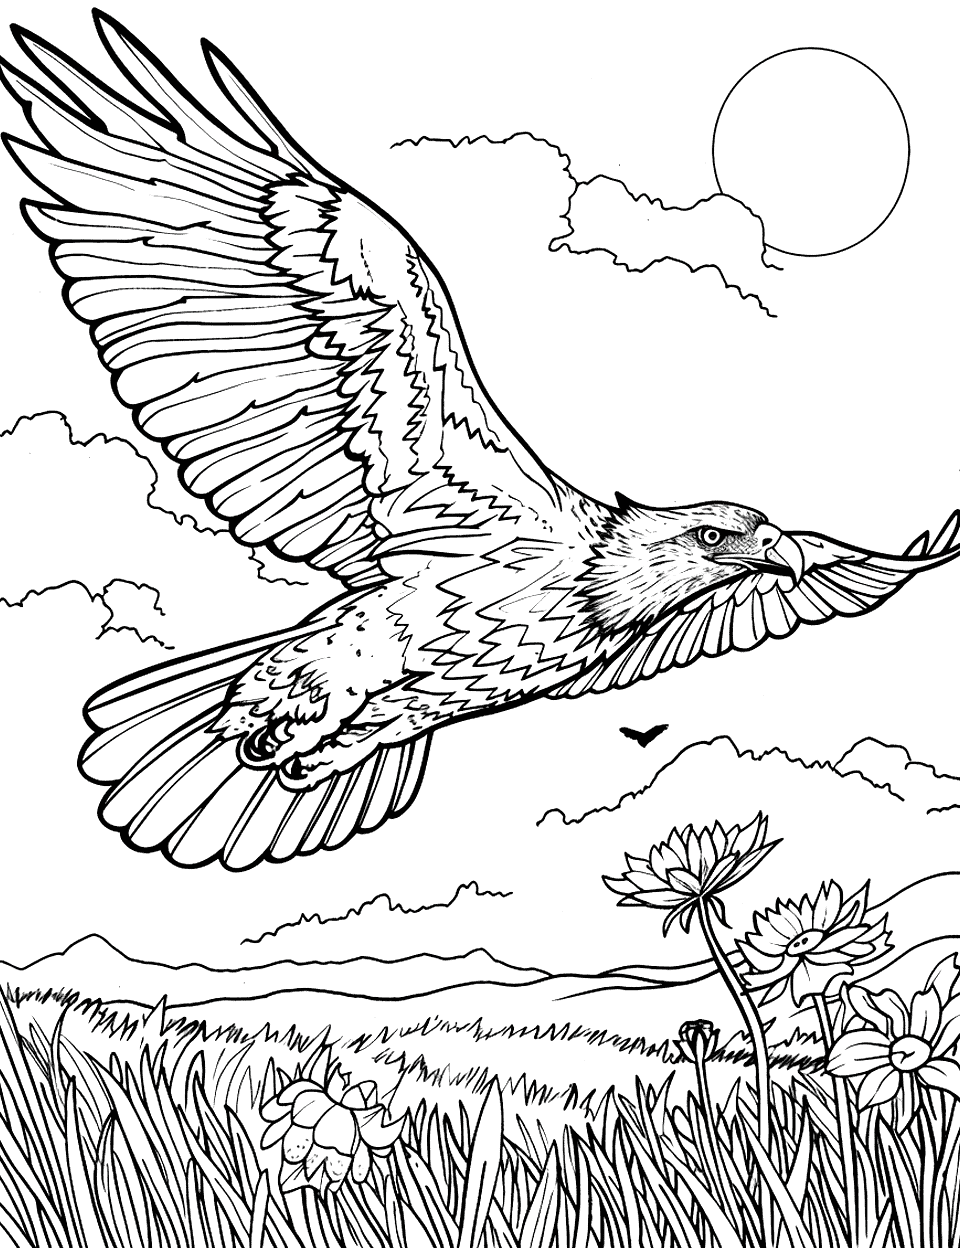 Eagle and the First Light of Spring Coloring Page - An eagle soars over a meadow full of spring flowers, with a simple sky and distant hills.